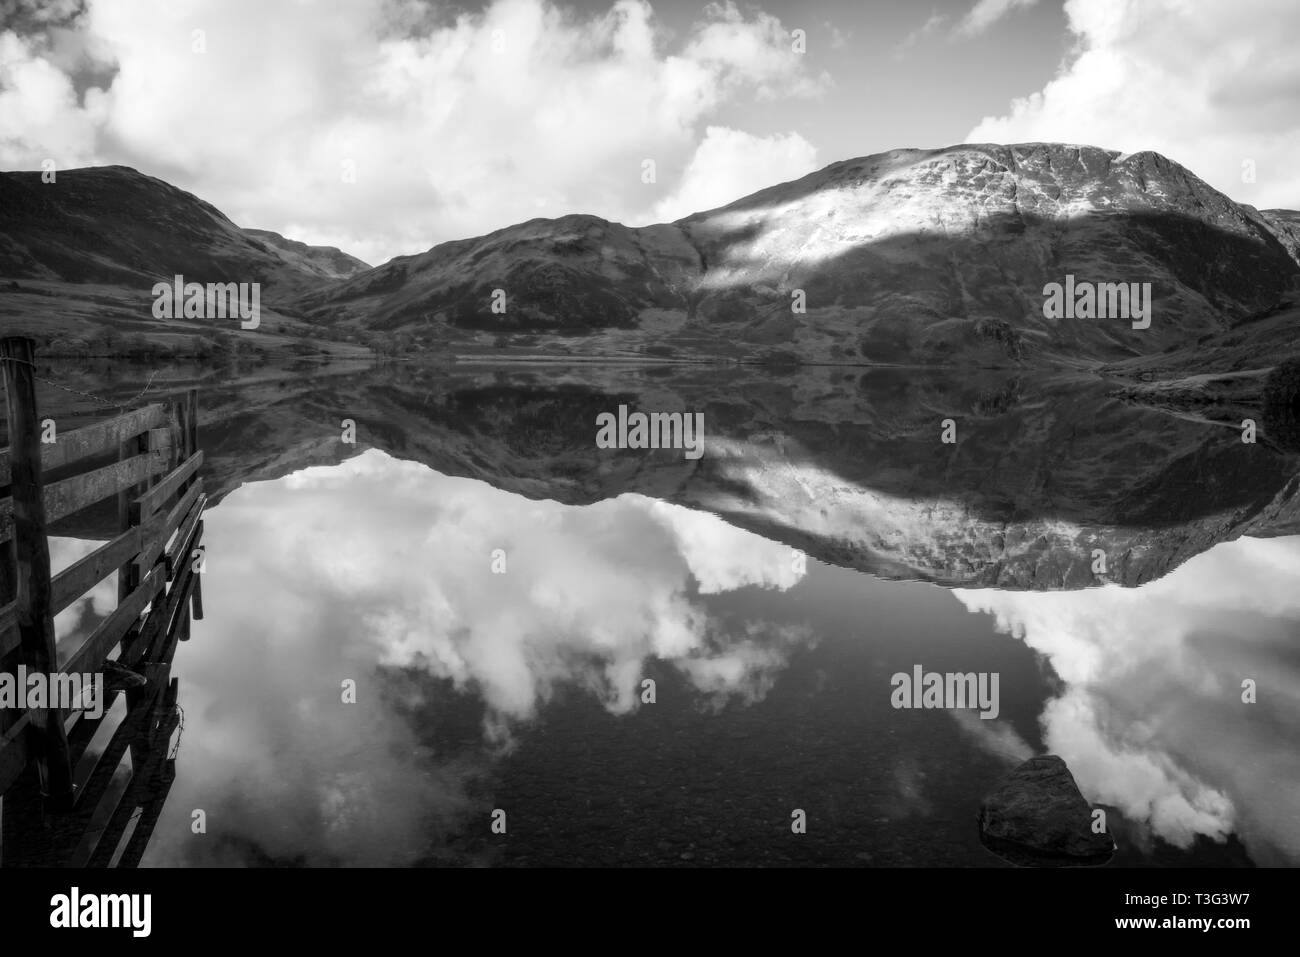 Black and White photograph of Crummock Water. Crummock Water is located in the Lake District National Park in the County of Cumbria,North West England Stock Photo